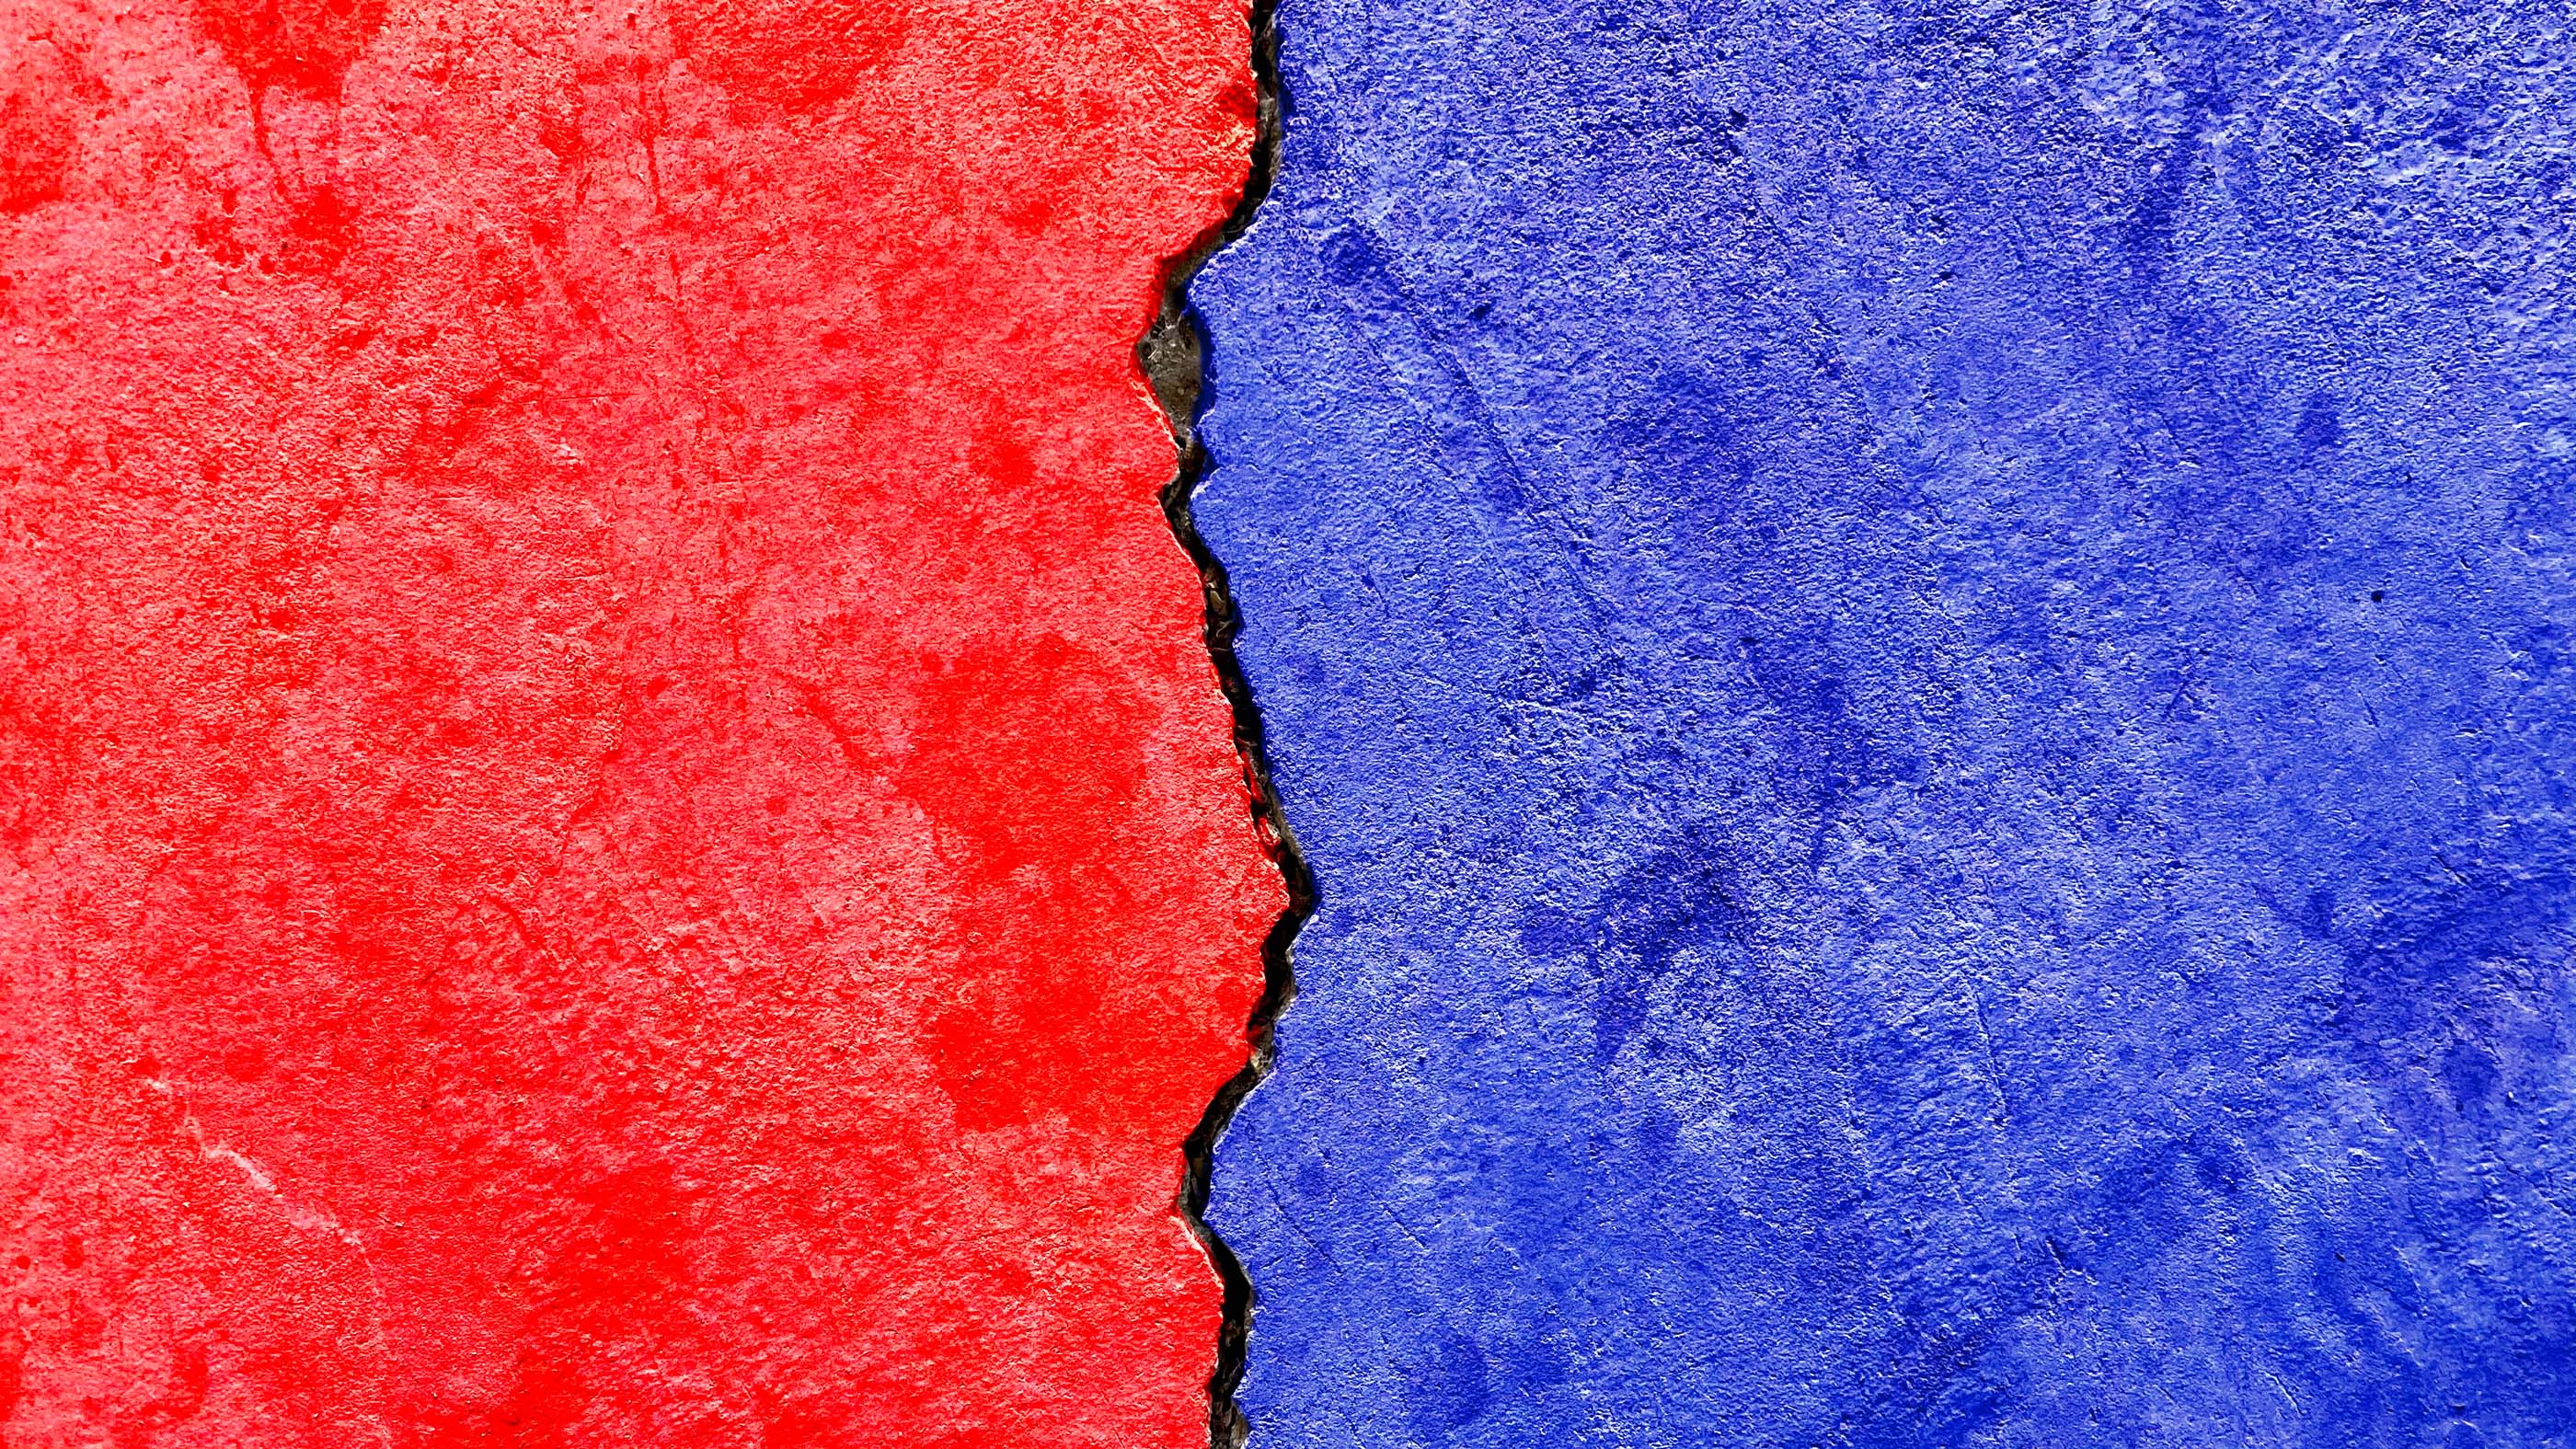 Why is red for Republicans and blue for Democrats? | Live Science